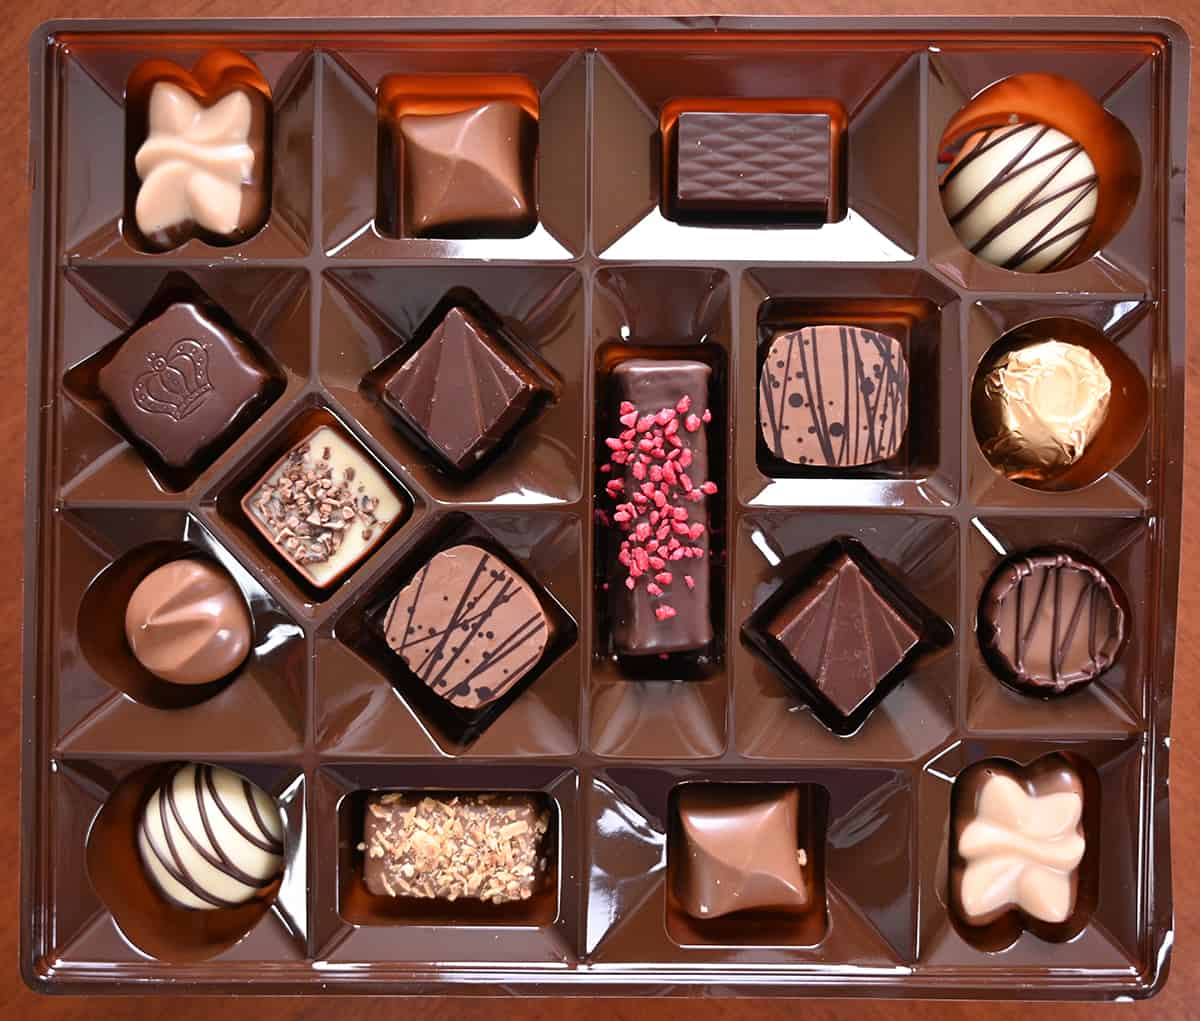 Top down image of an open box of Gudrun chocolates unwrapped so you can see all the different chocolates.